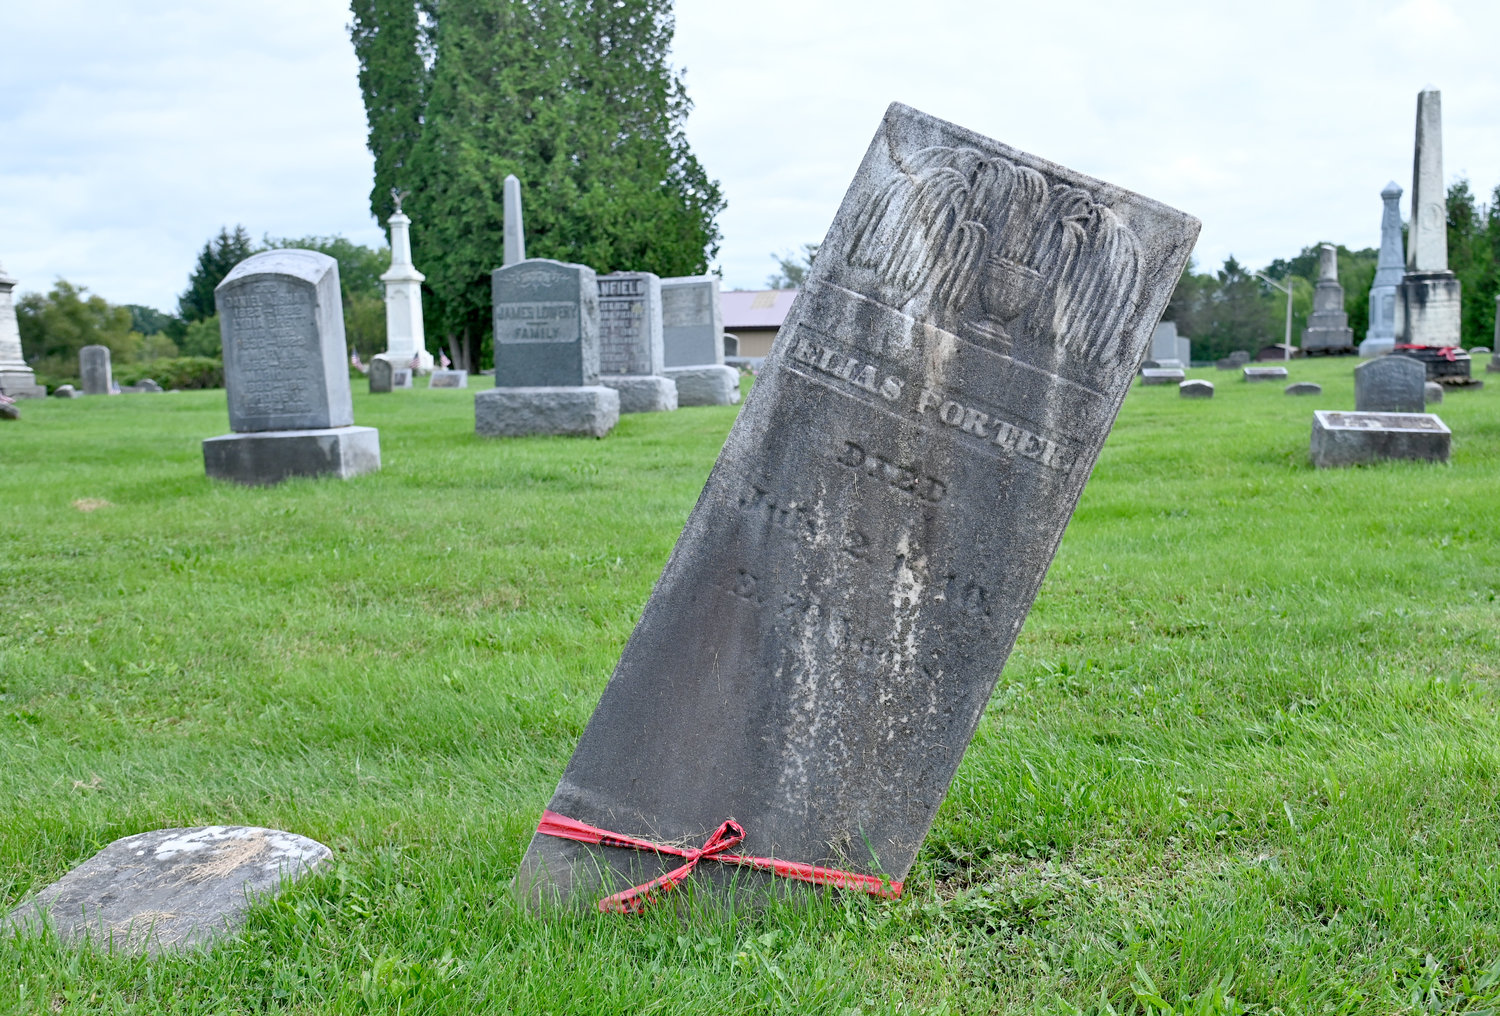 A red ribbon is tied around a tilted headstone at the Oriskany Cemetery off Cider Street on Wednesday. A $72,765 grant will help fix this and other headstones and monuments at the cemetery, officials said.